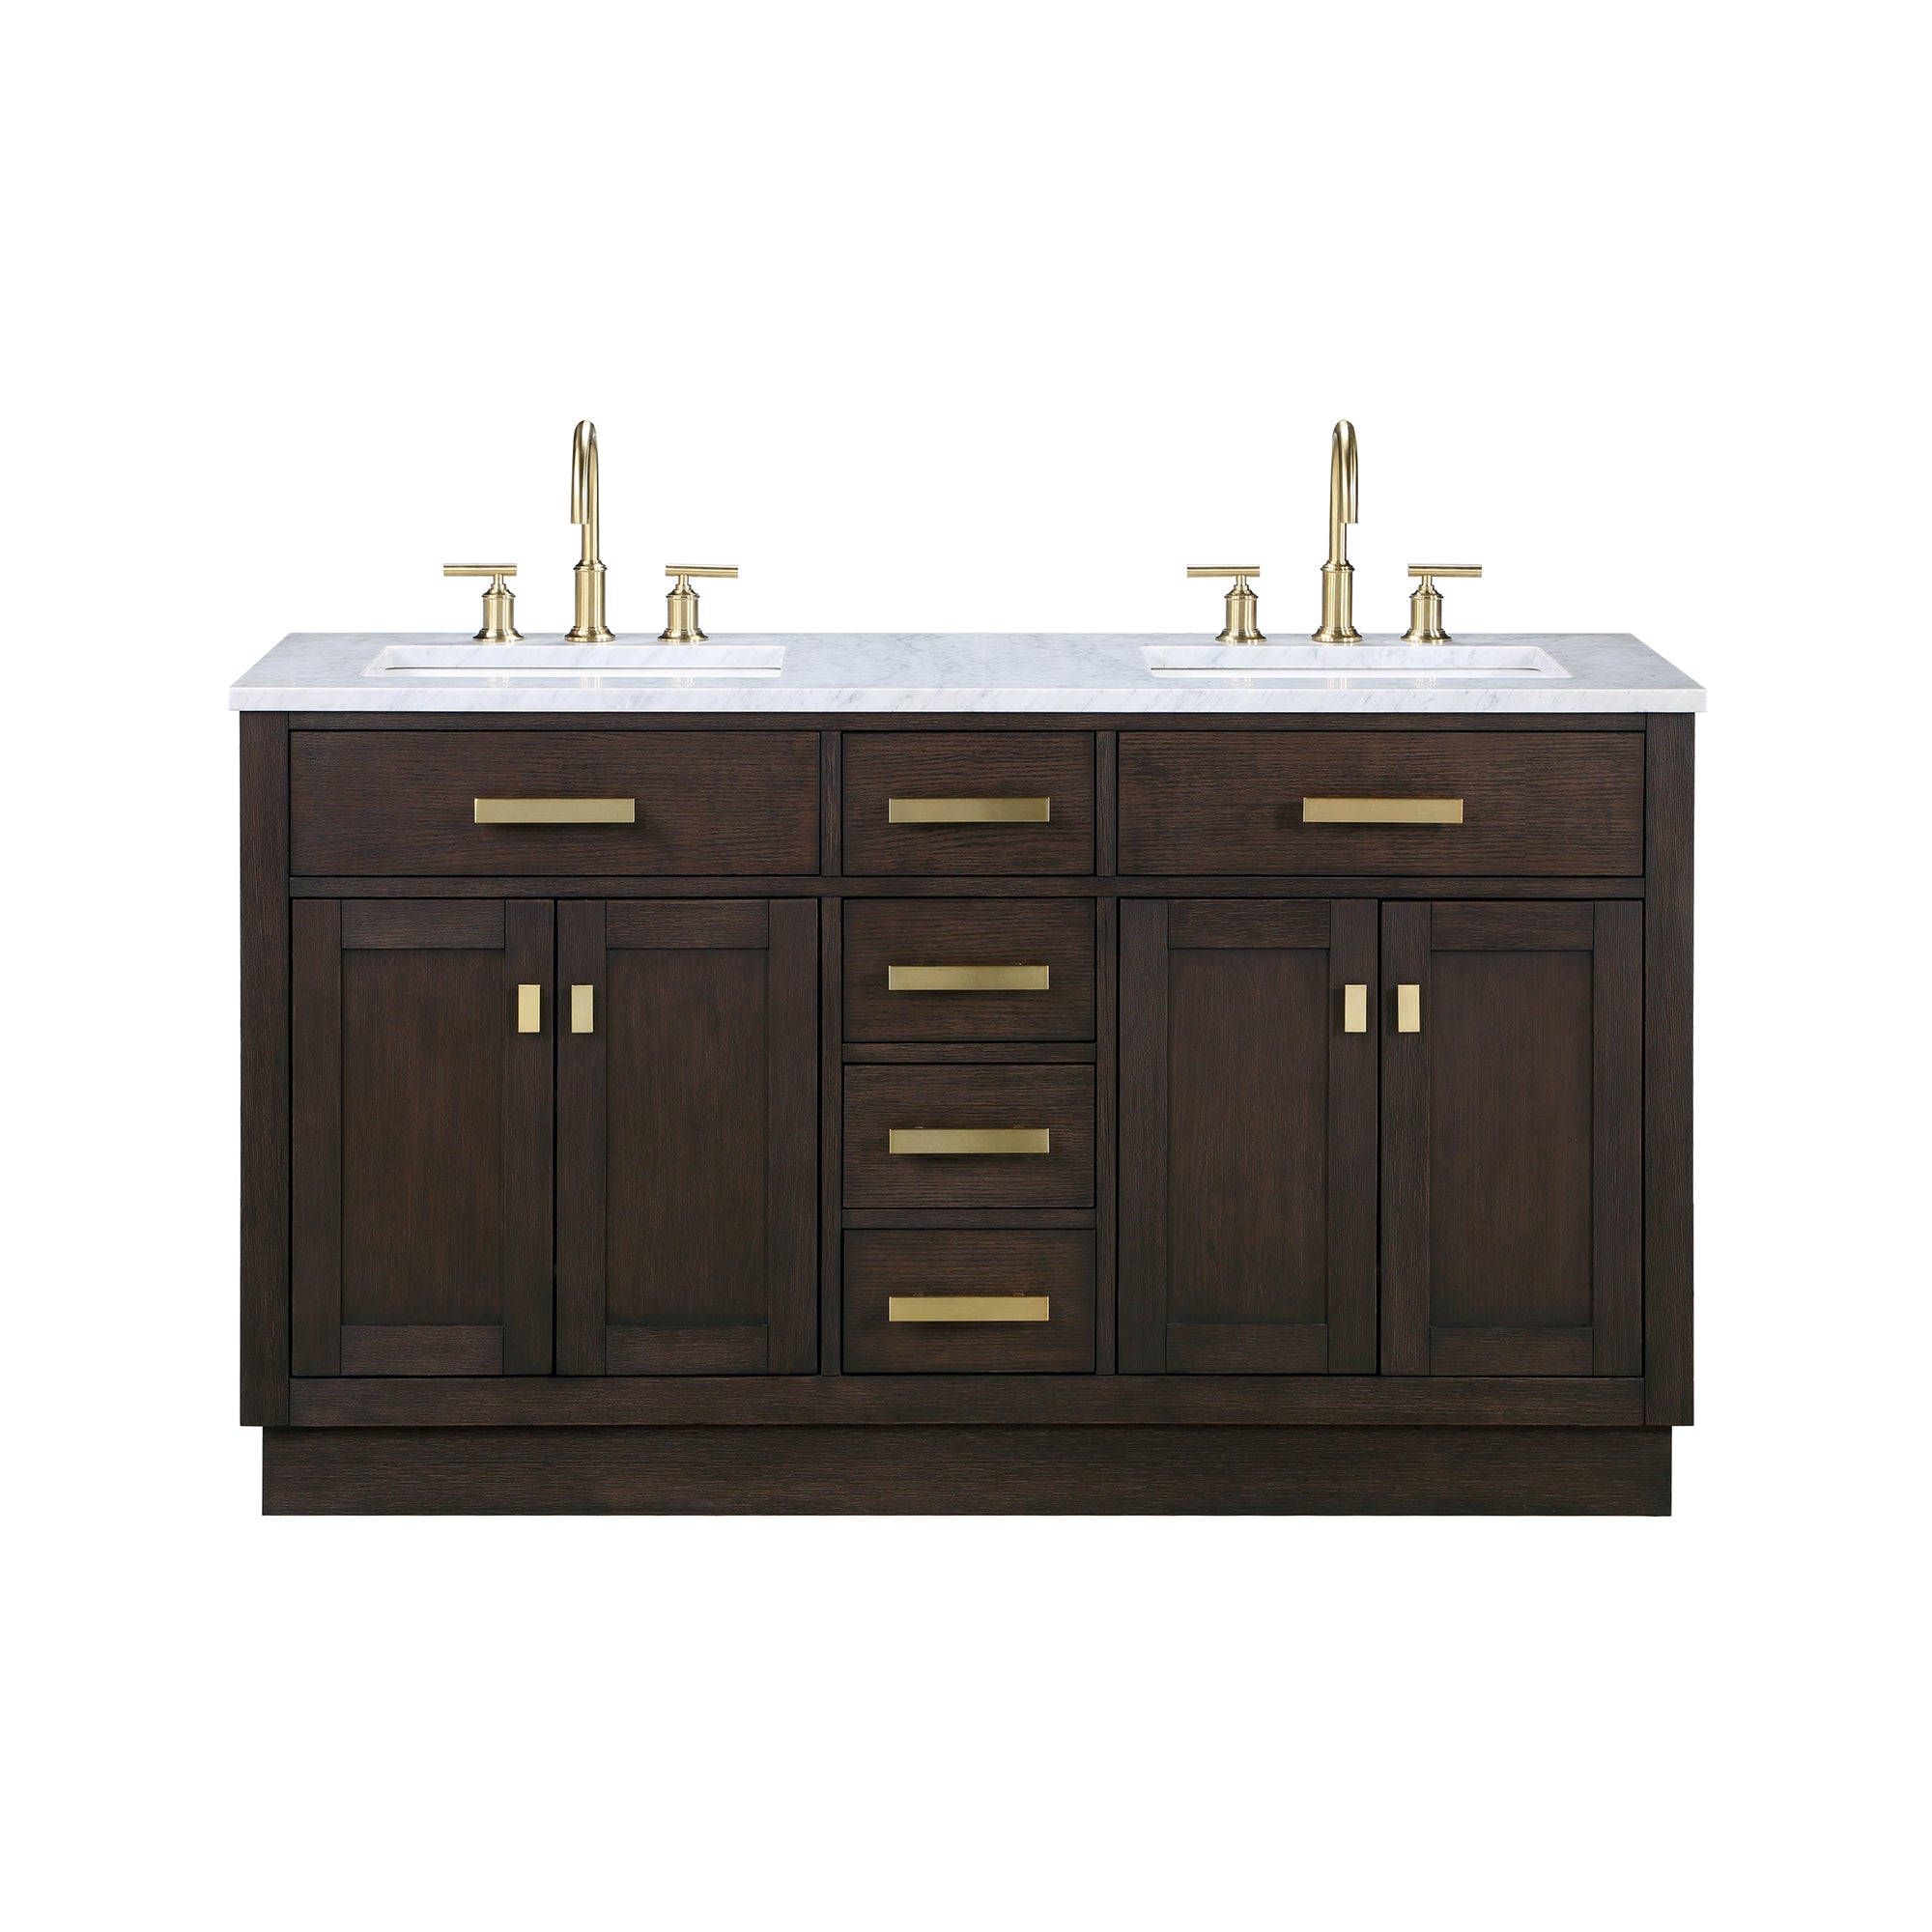 Water Creation | Chestnut 60 In. Double Sink Carrara White Marble Countertop Vanity In Brown Oak with Grooseneck Faucets | CH60CW06BK-000BL1406